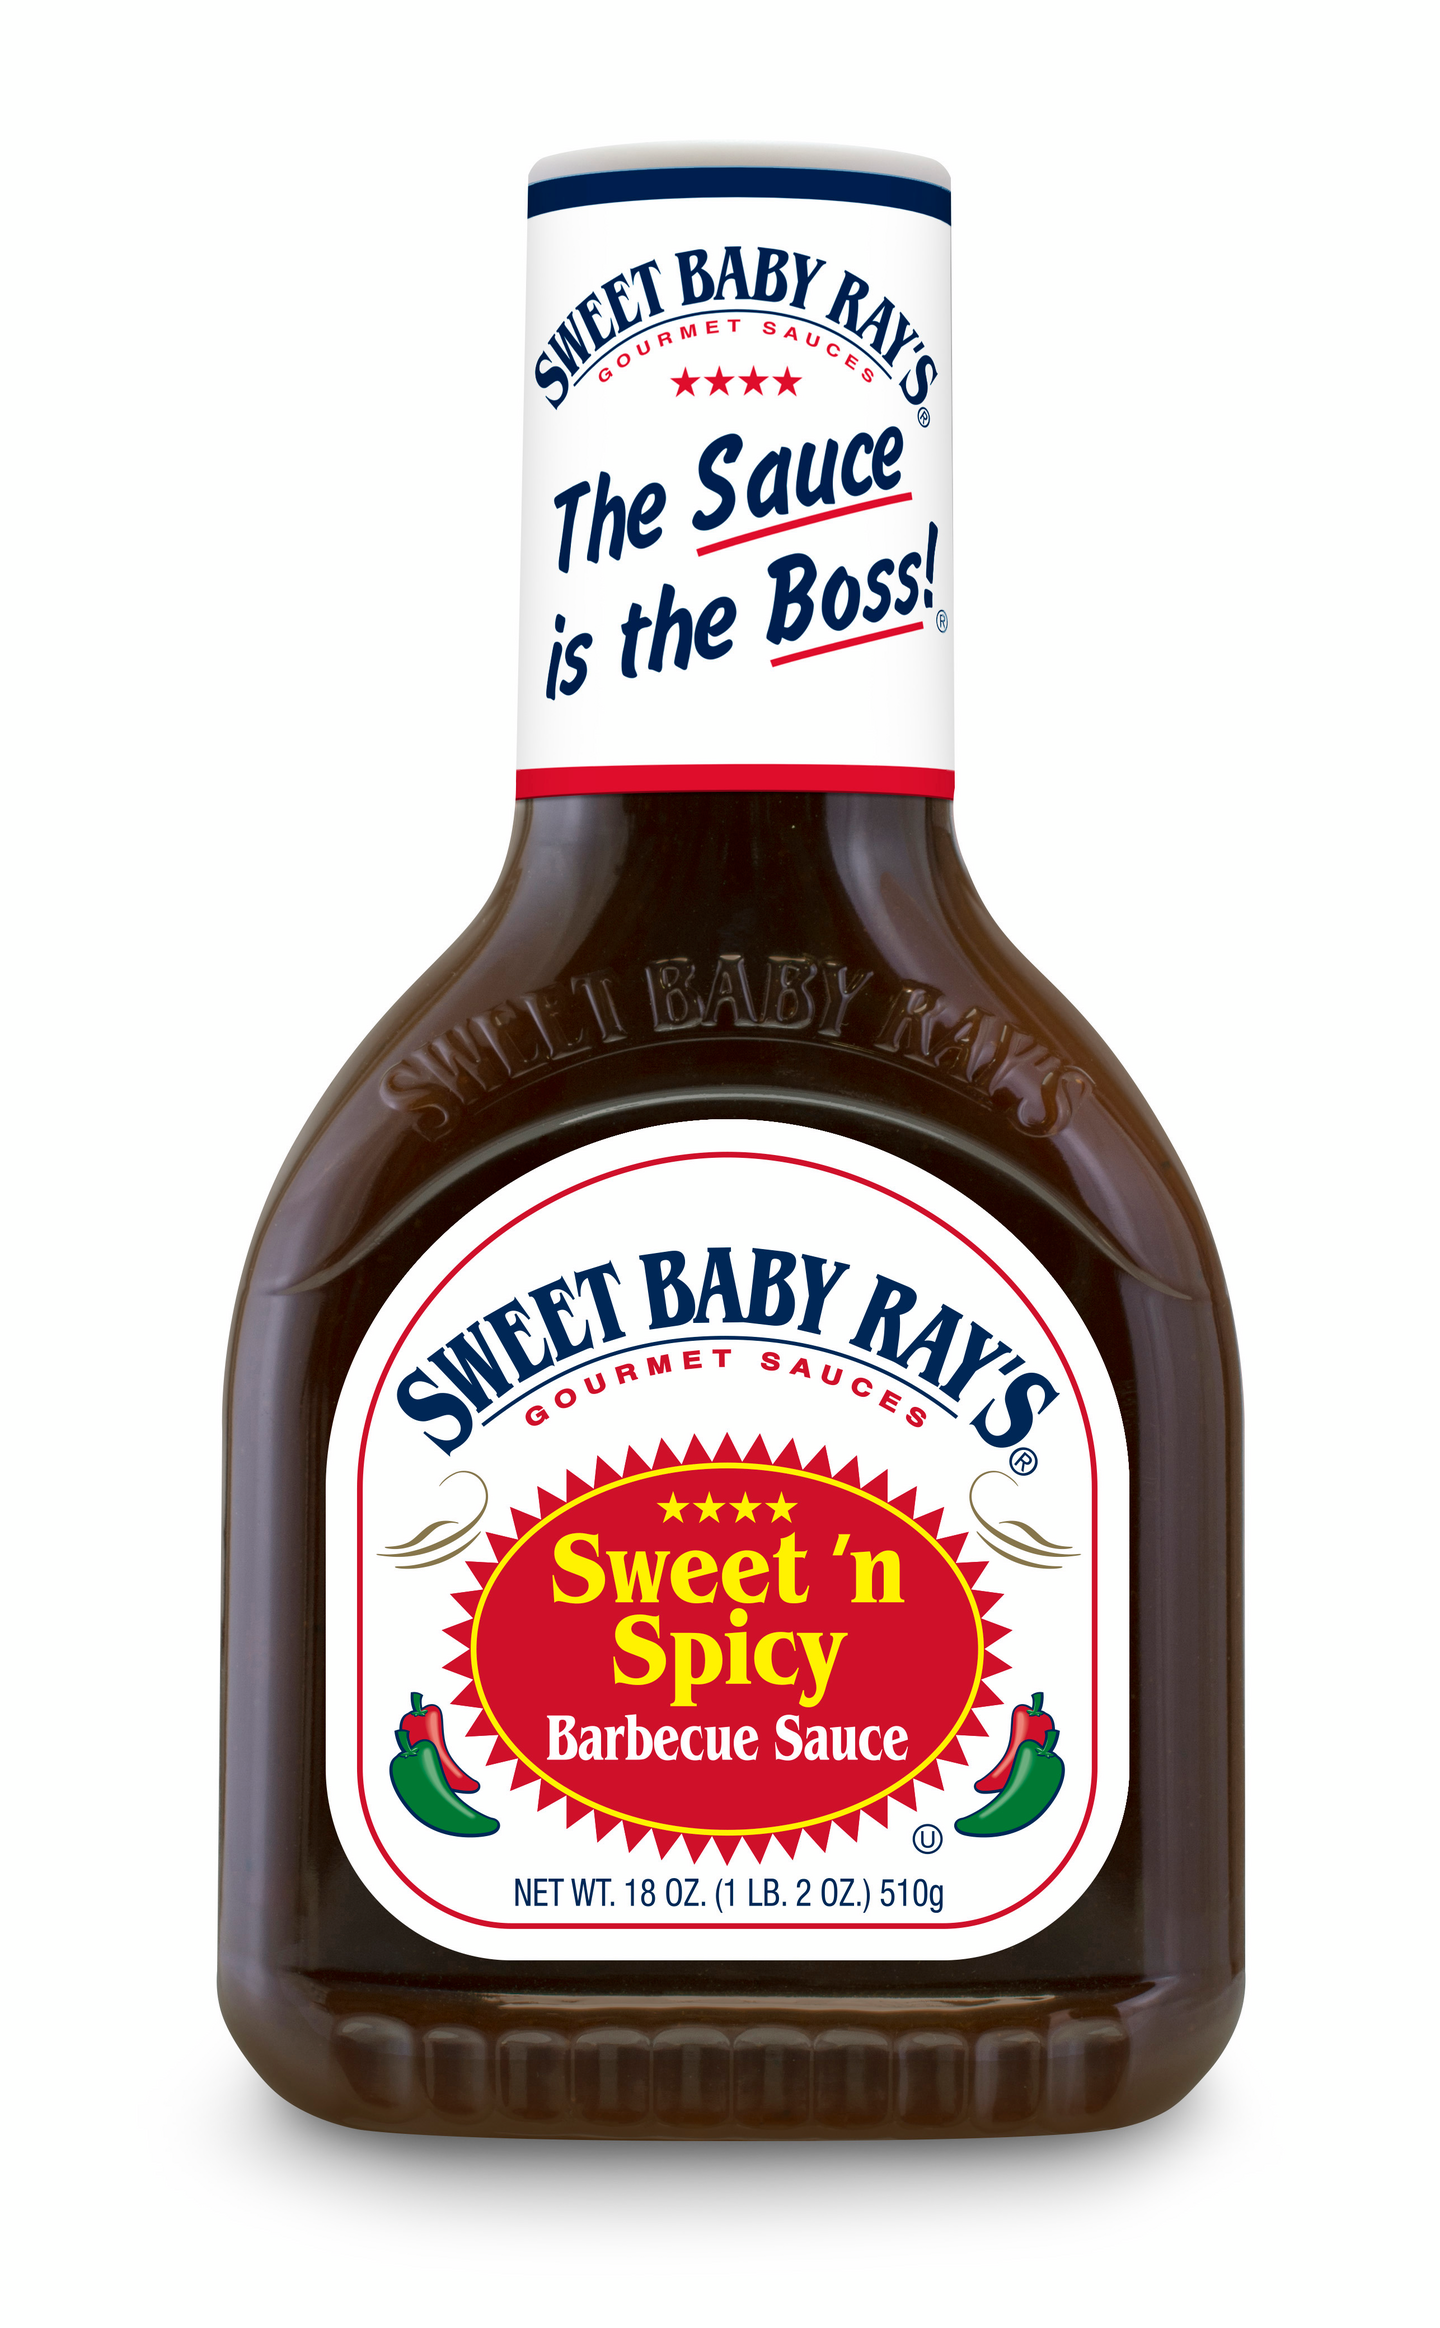 Sweet Baby Ray's BBQ kastike 510g Sweet Spicy